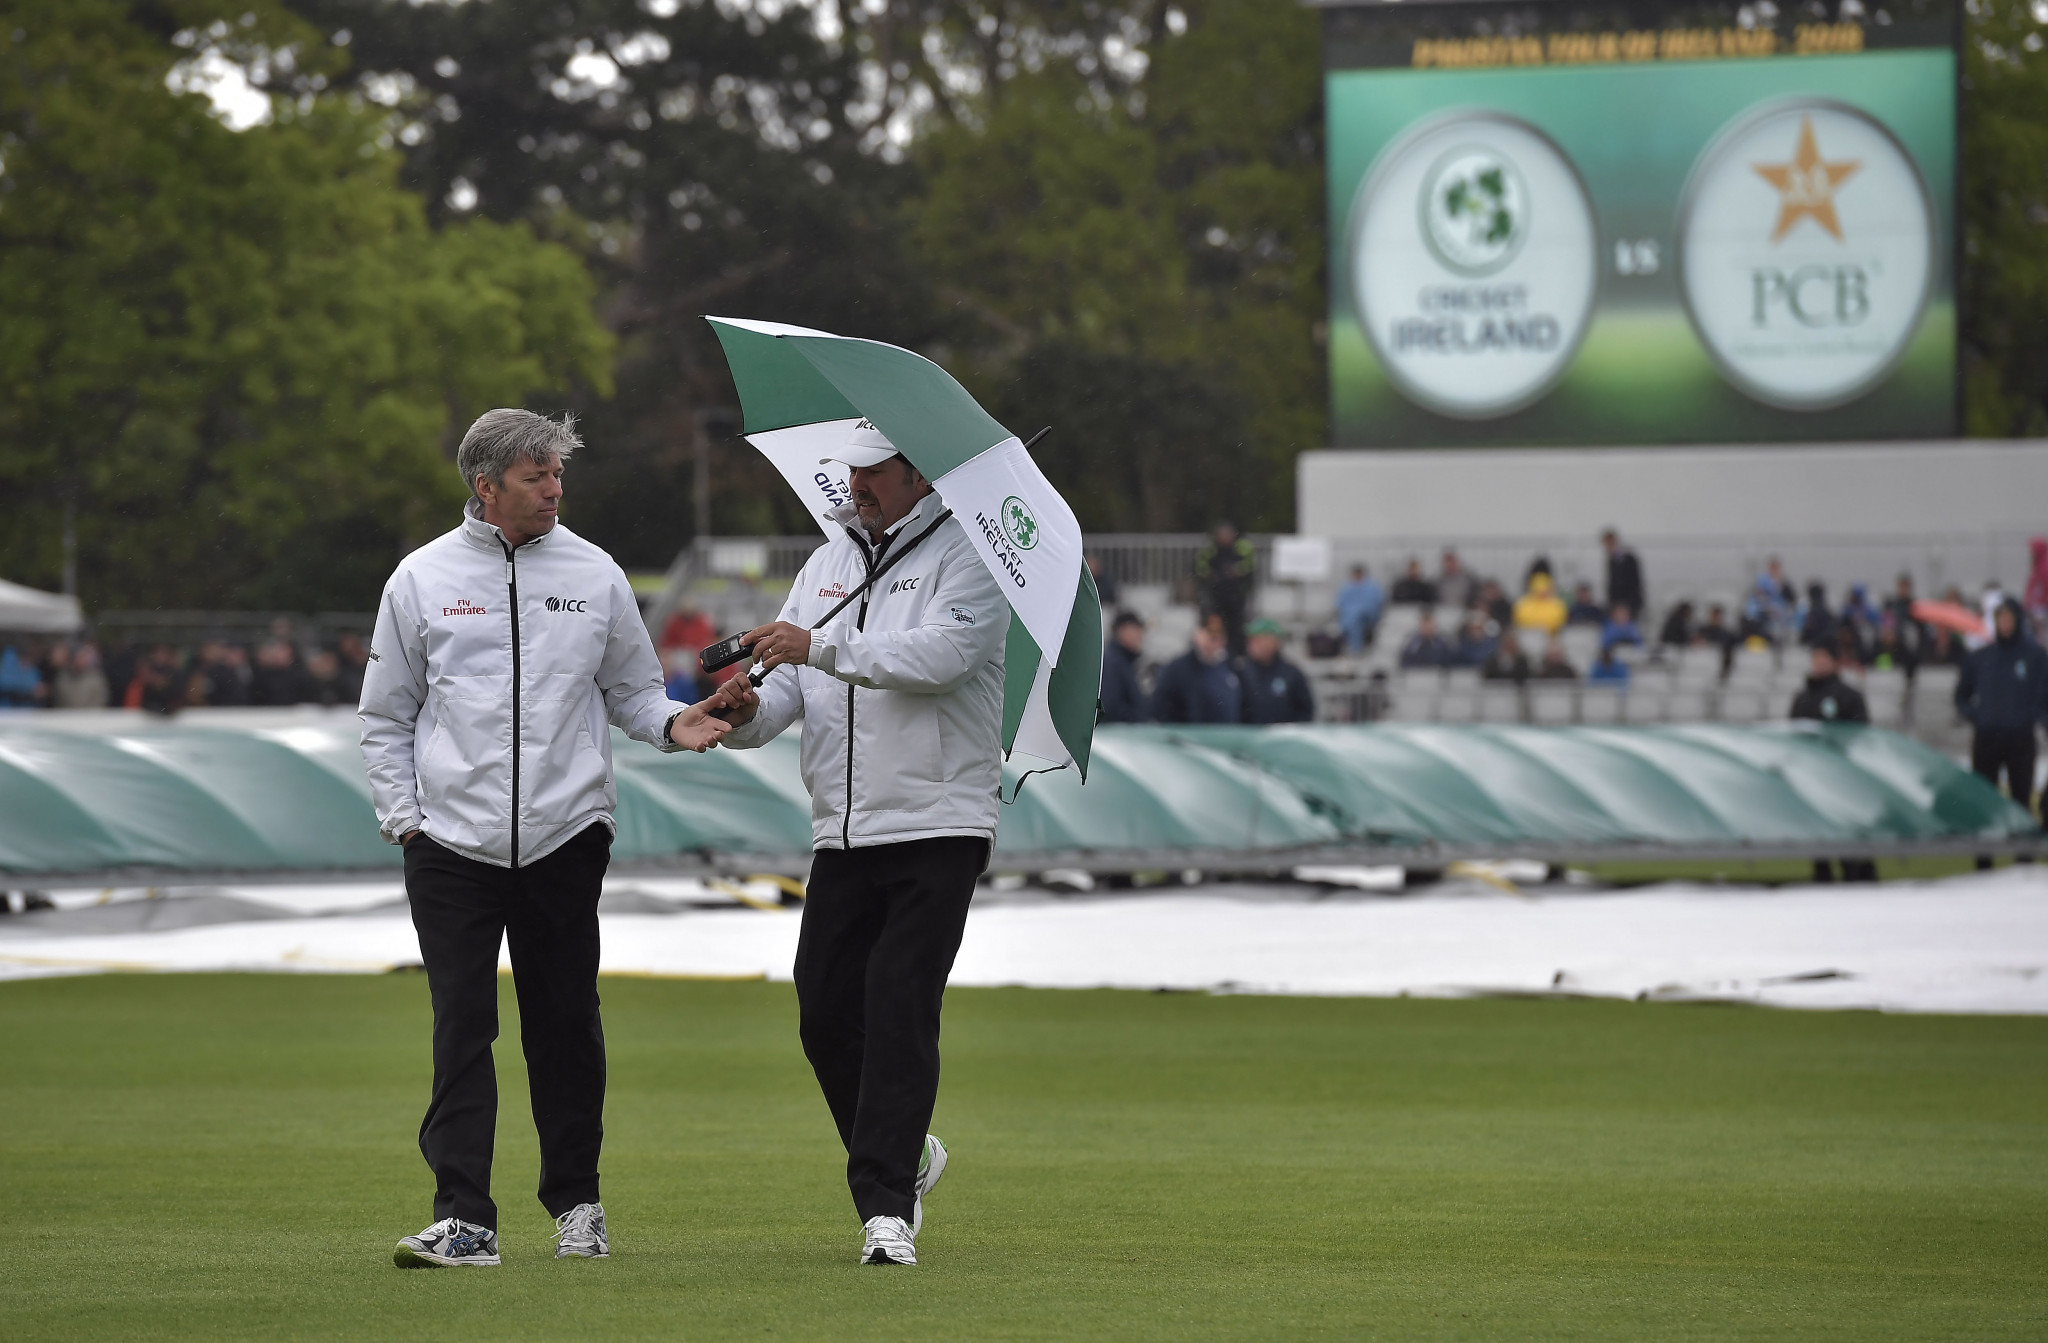 Ireland's cricket team have been forced to wait to make their Test debut after the first day of their historic inaugural match against Pakistan was washed out ©Getty Images